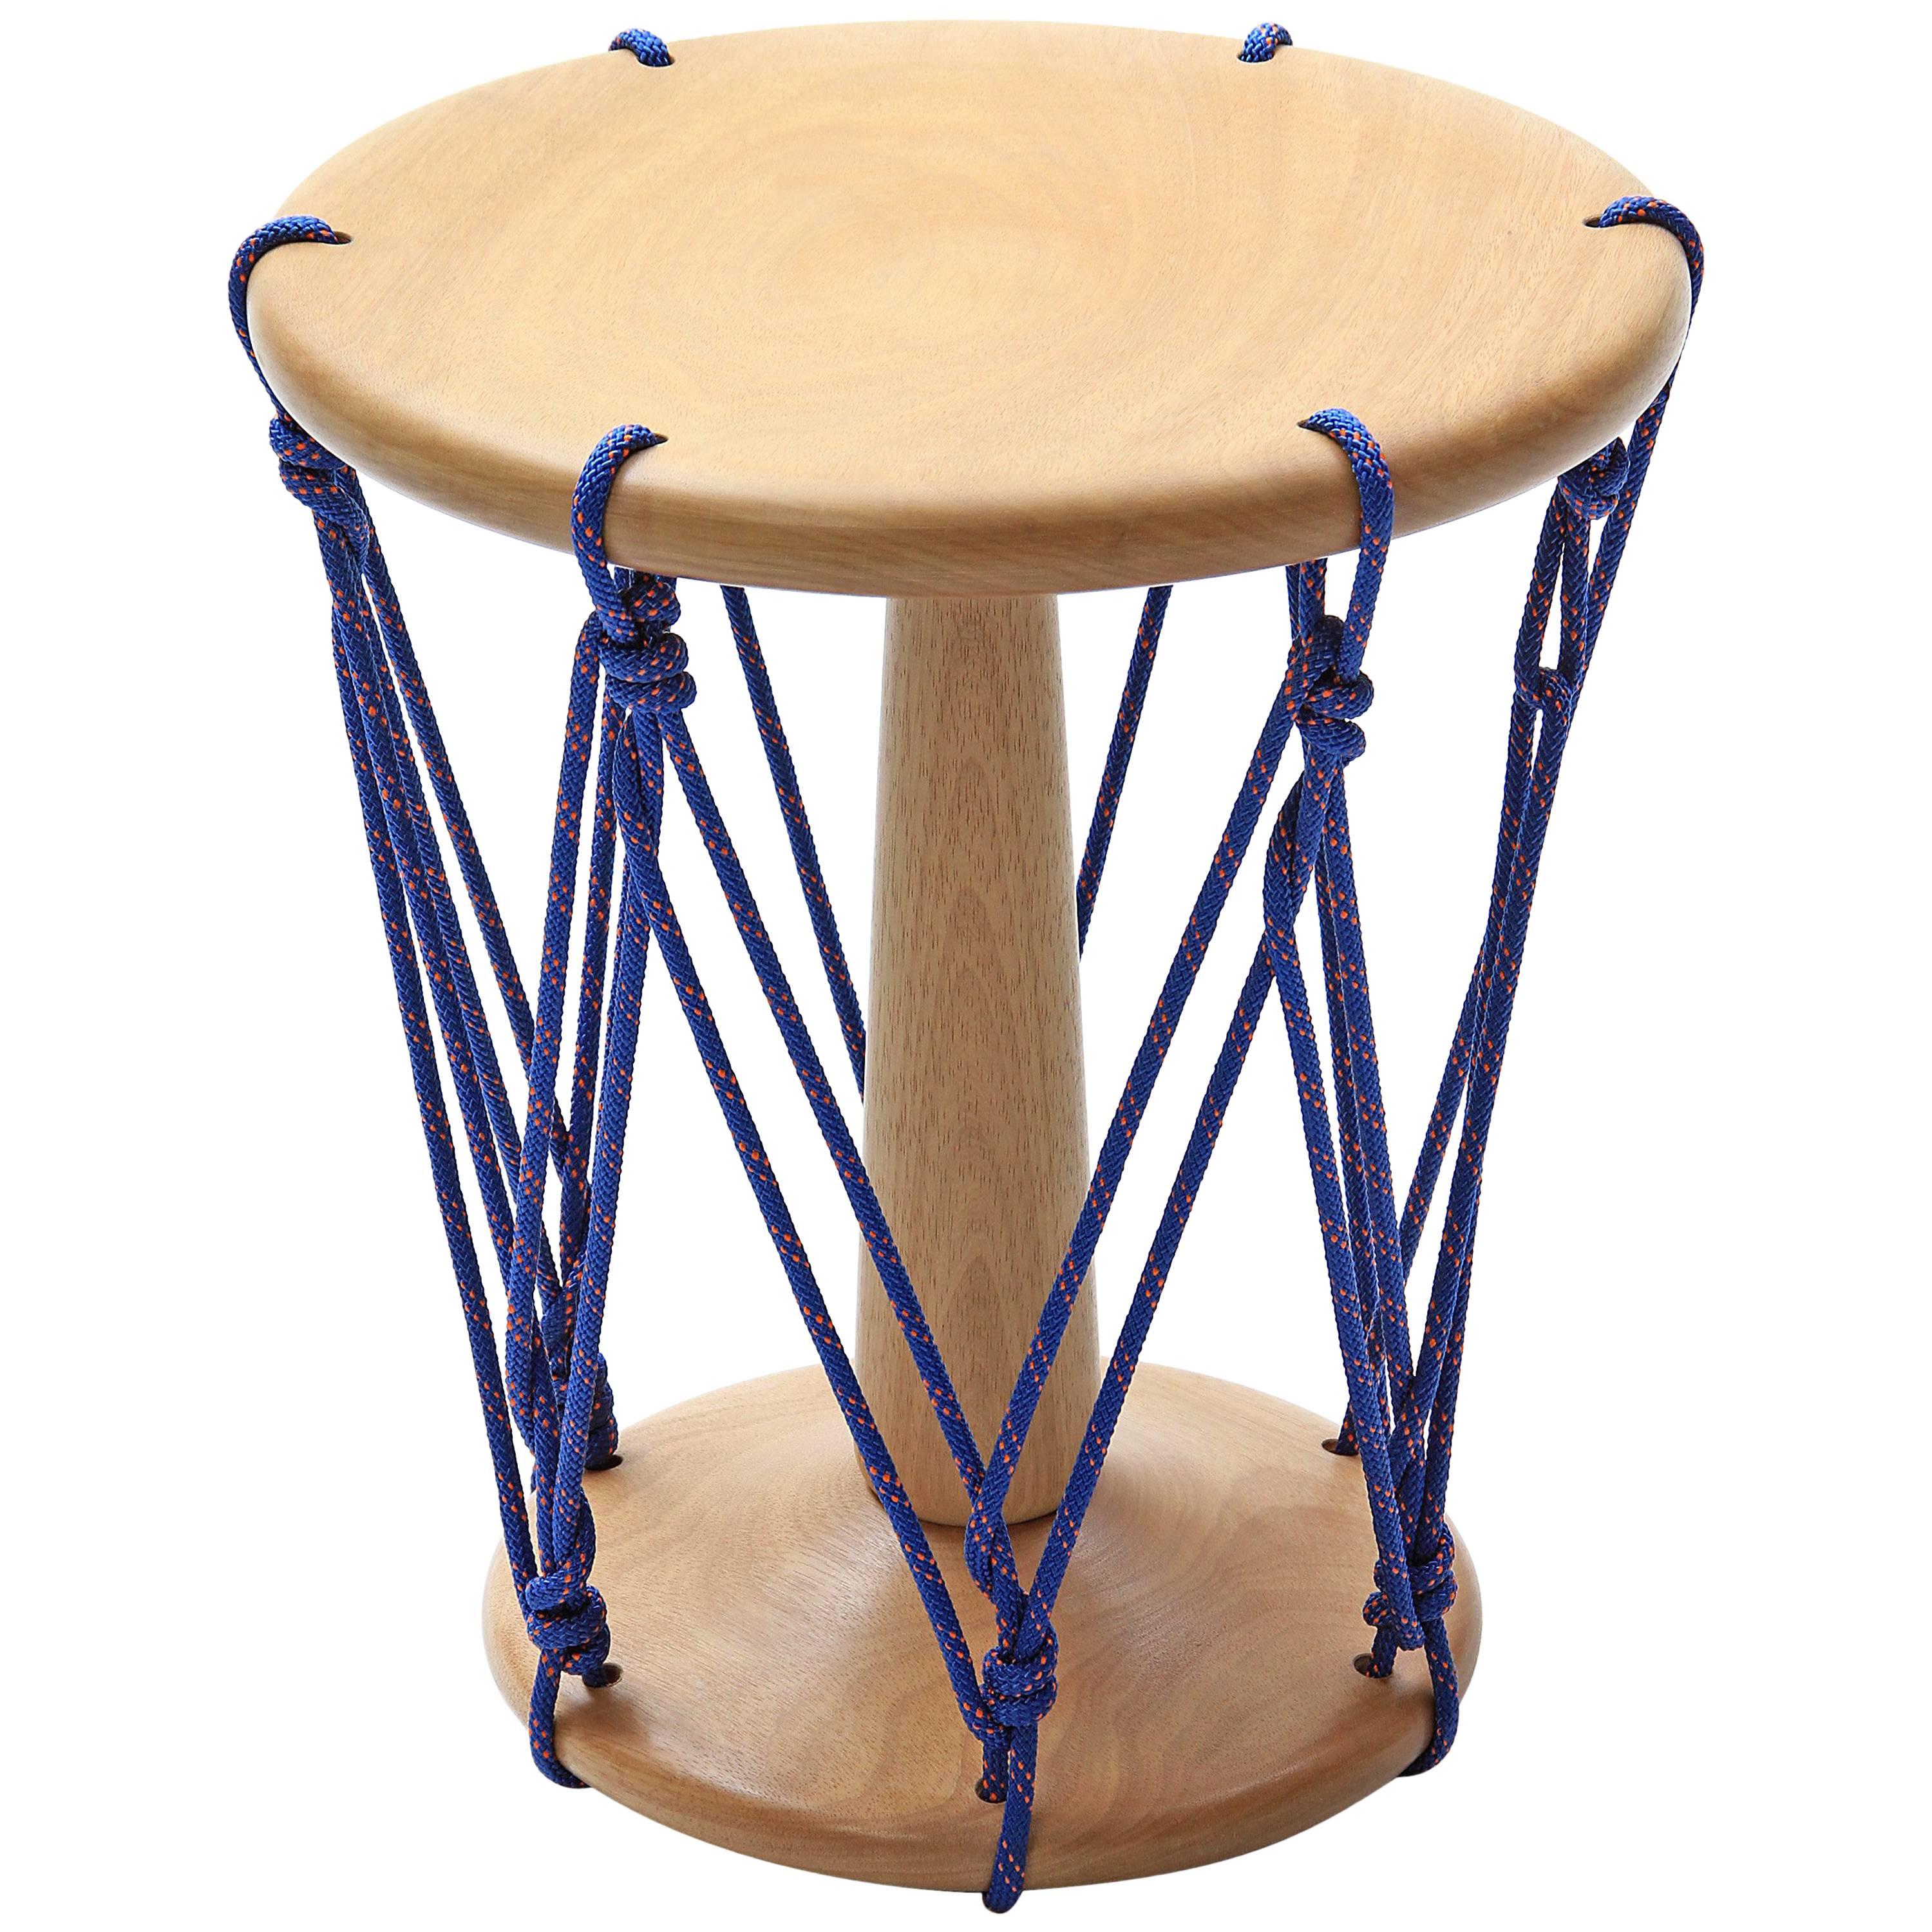 Baque Stool in Wood and Blue Cord, Contemporary Design For Sale